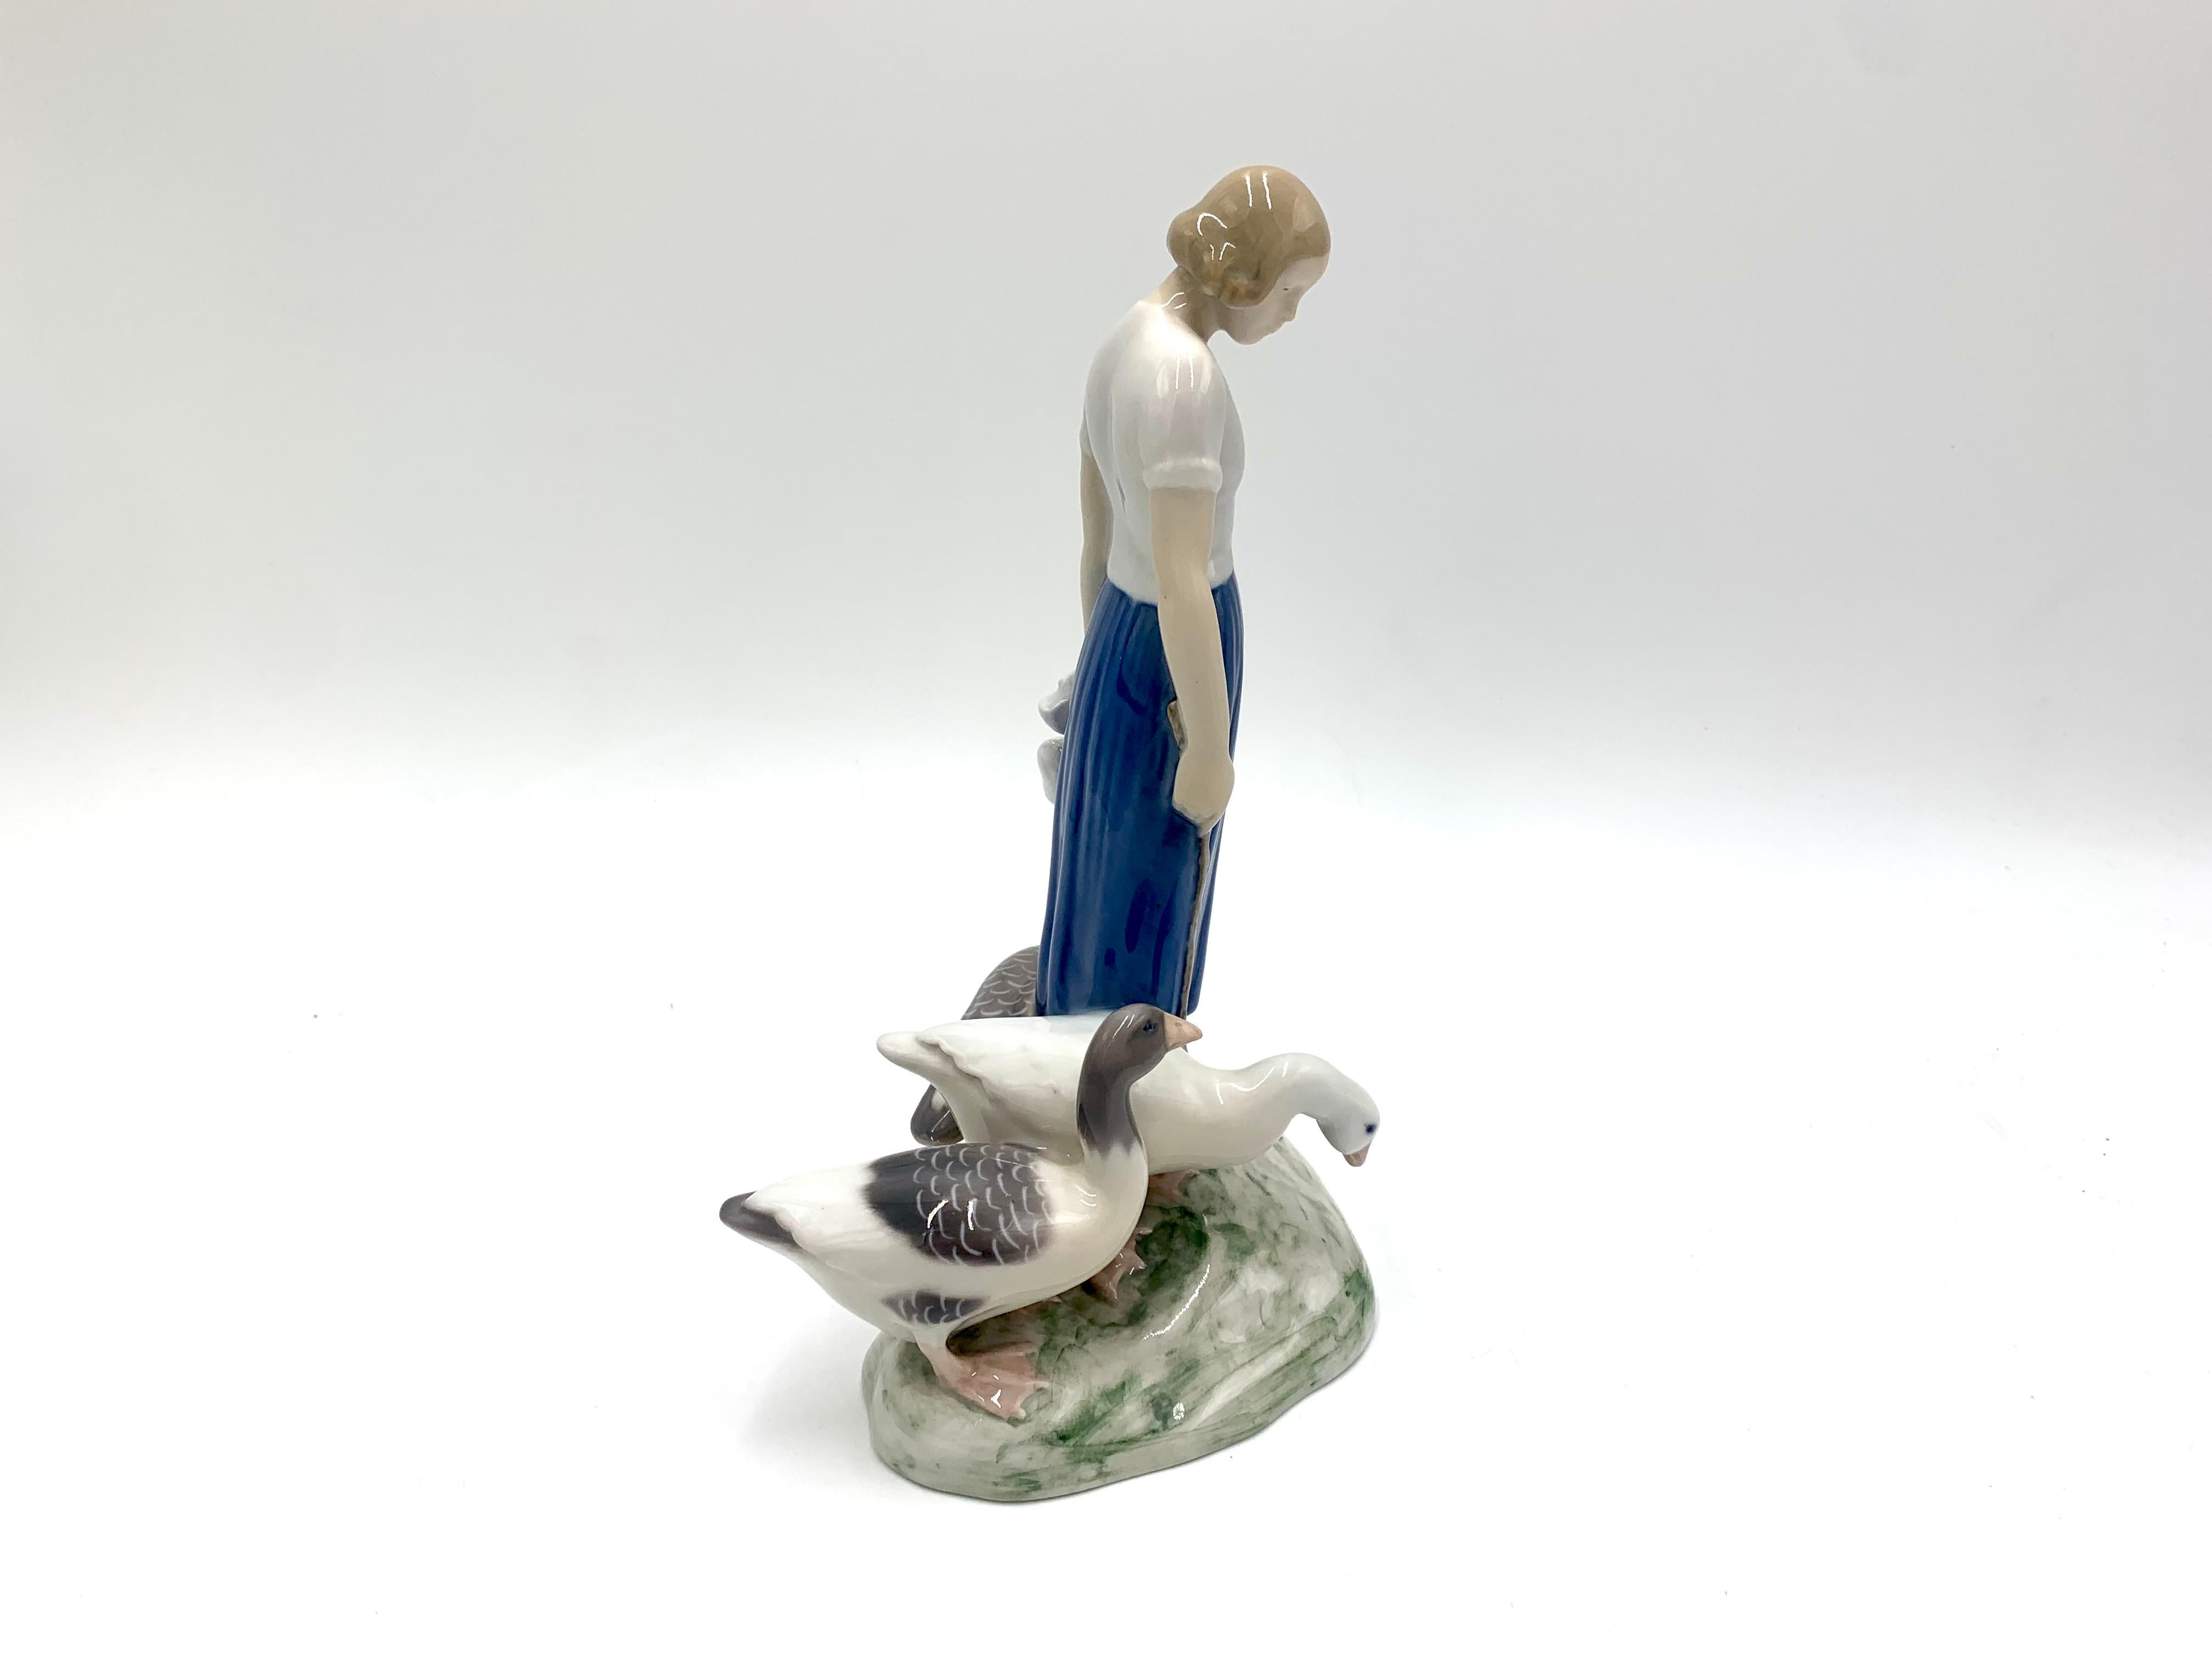 Mid-Century Modern Porcelain Figurine of a Woman with Geese, Bing & Grondahl, Denmark, 1950s / 1960